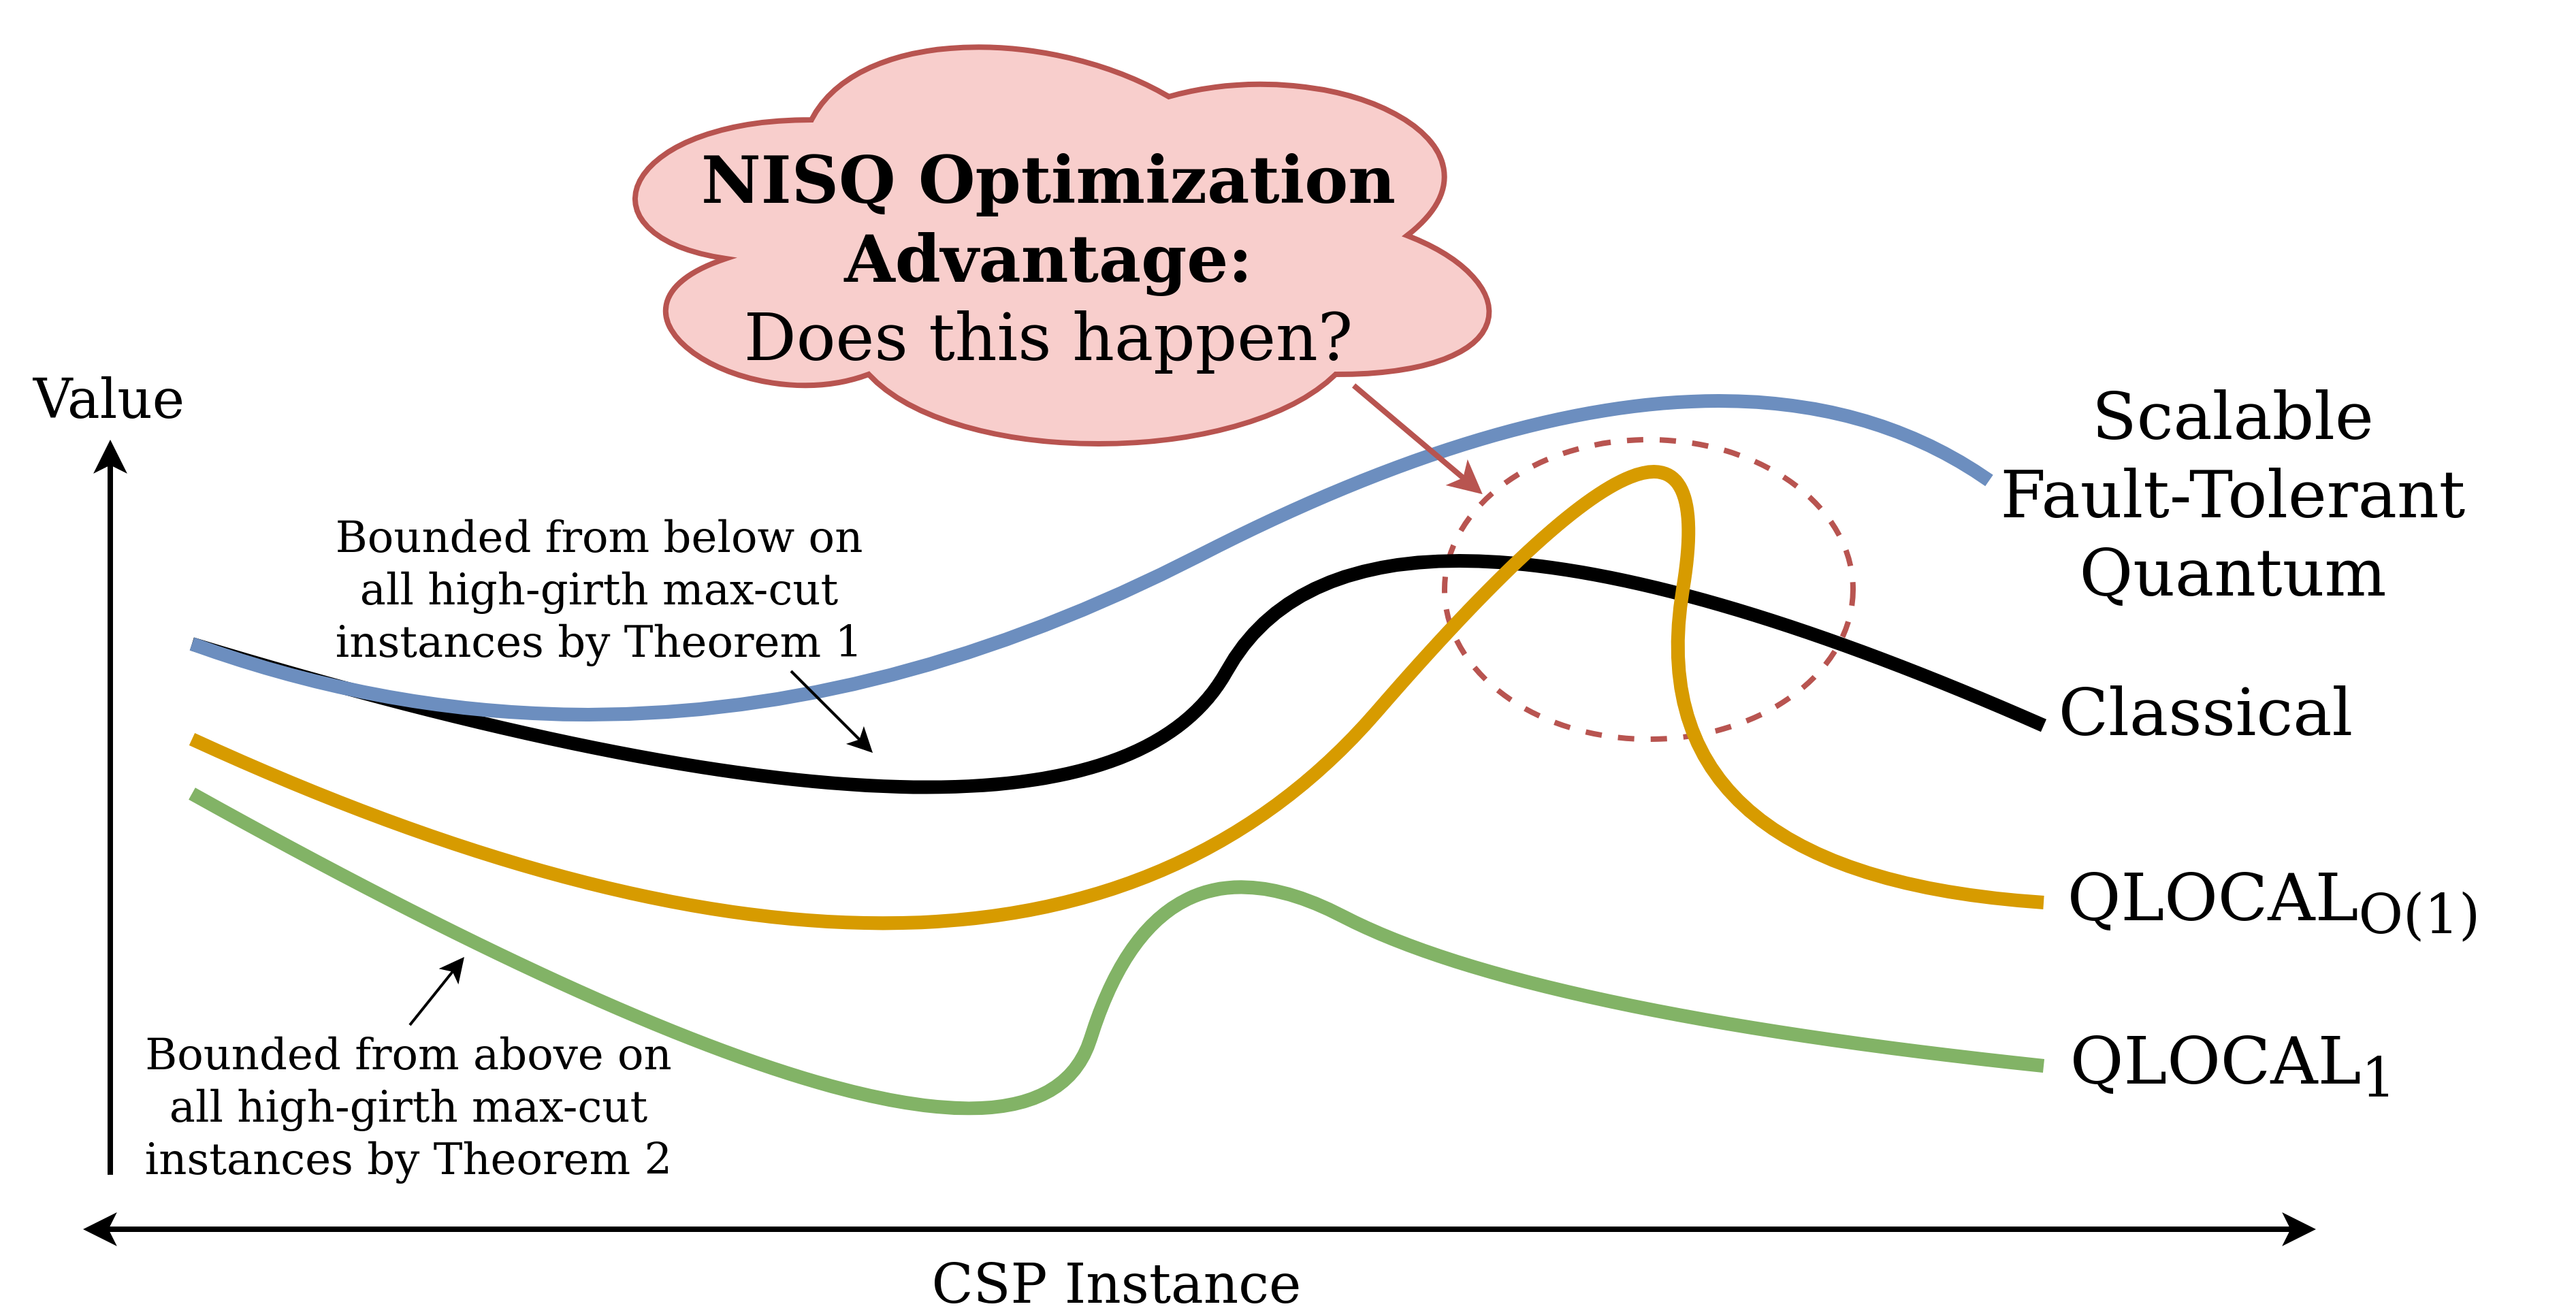 A plot of conjectured performance of classical and quantum algorithms. It asks the question if NISQ Advantage for Optimization exists.